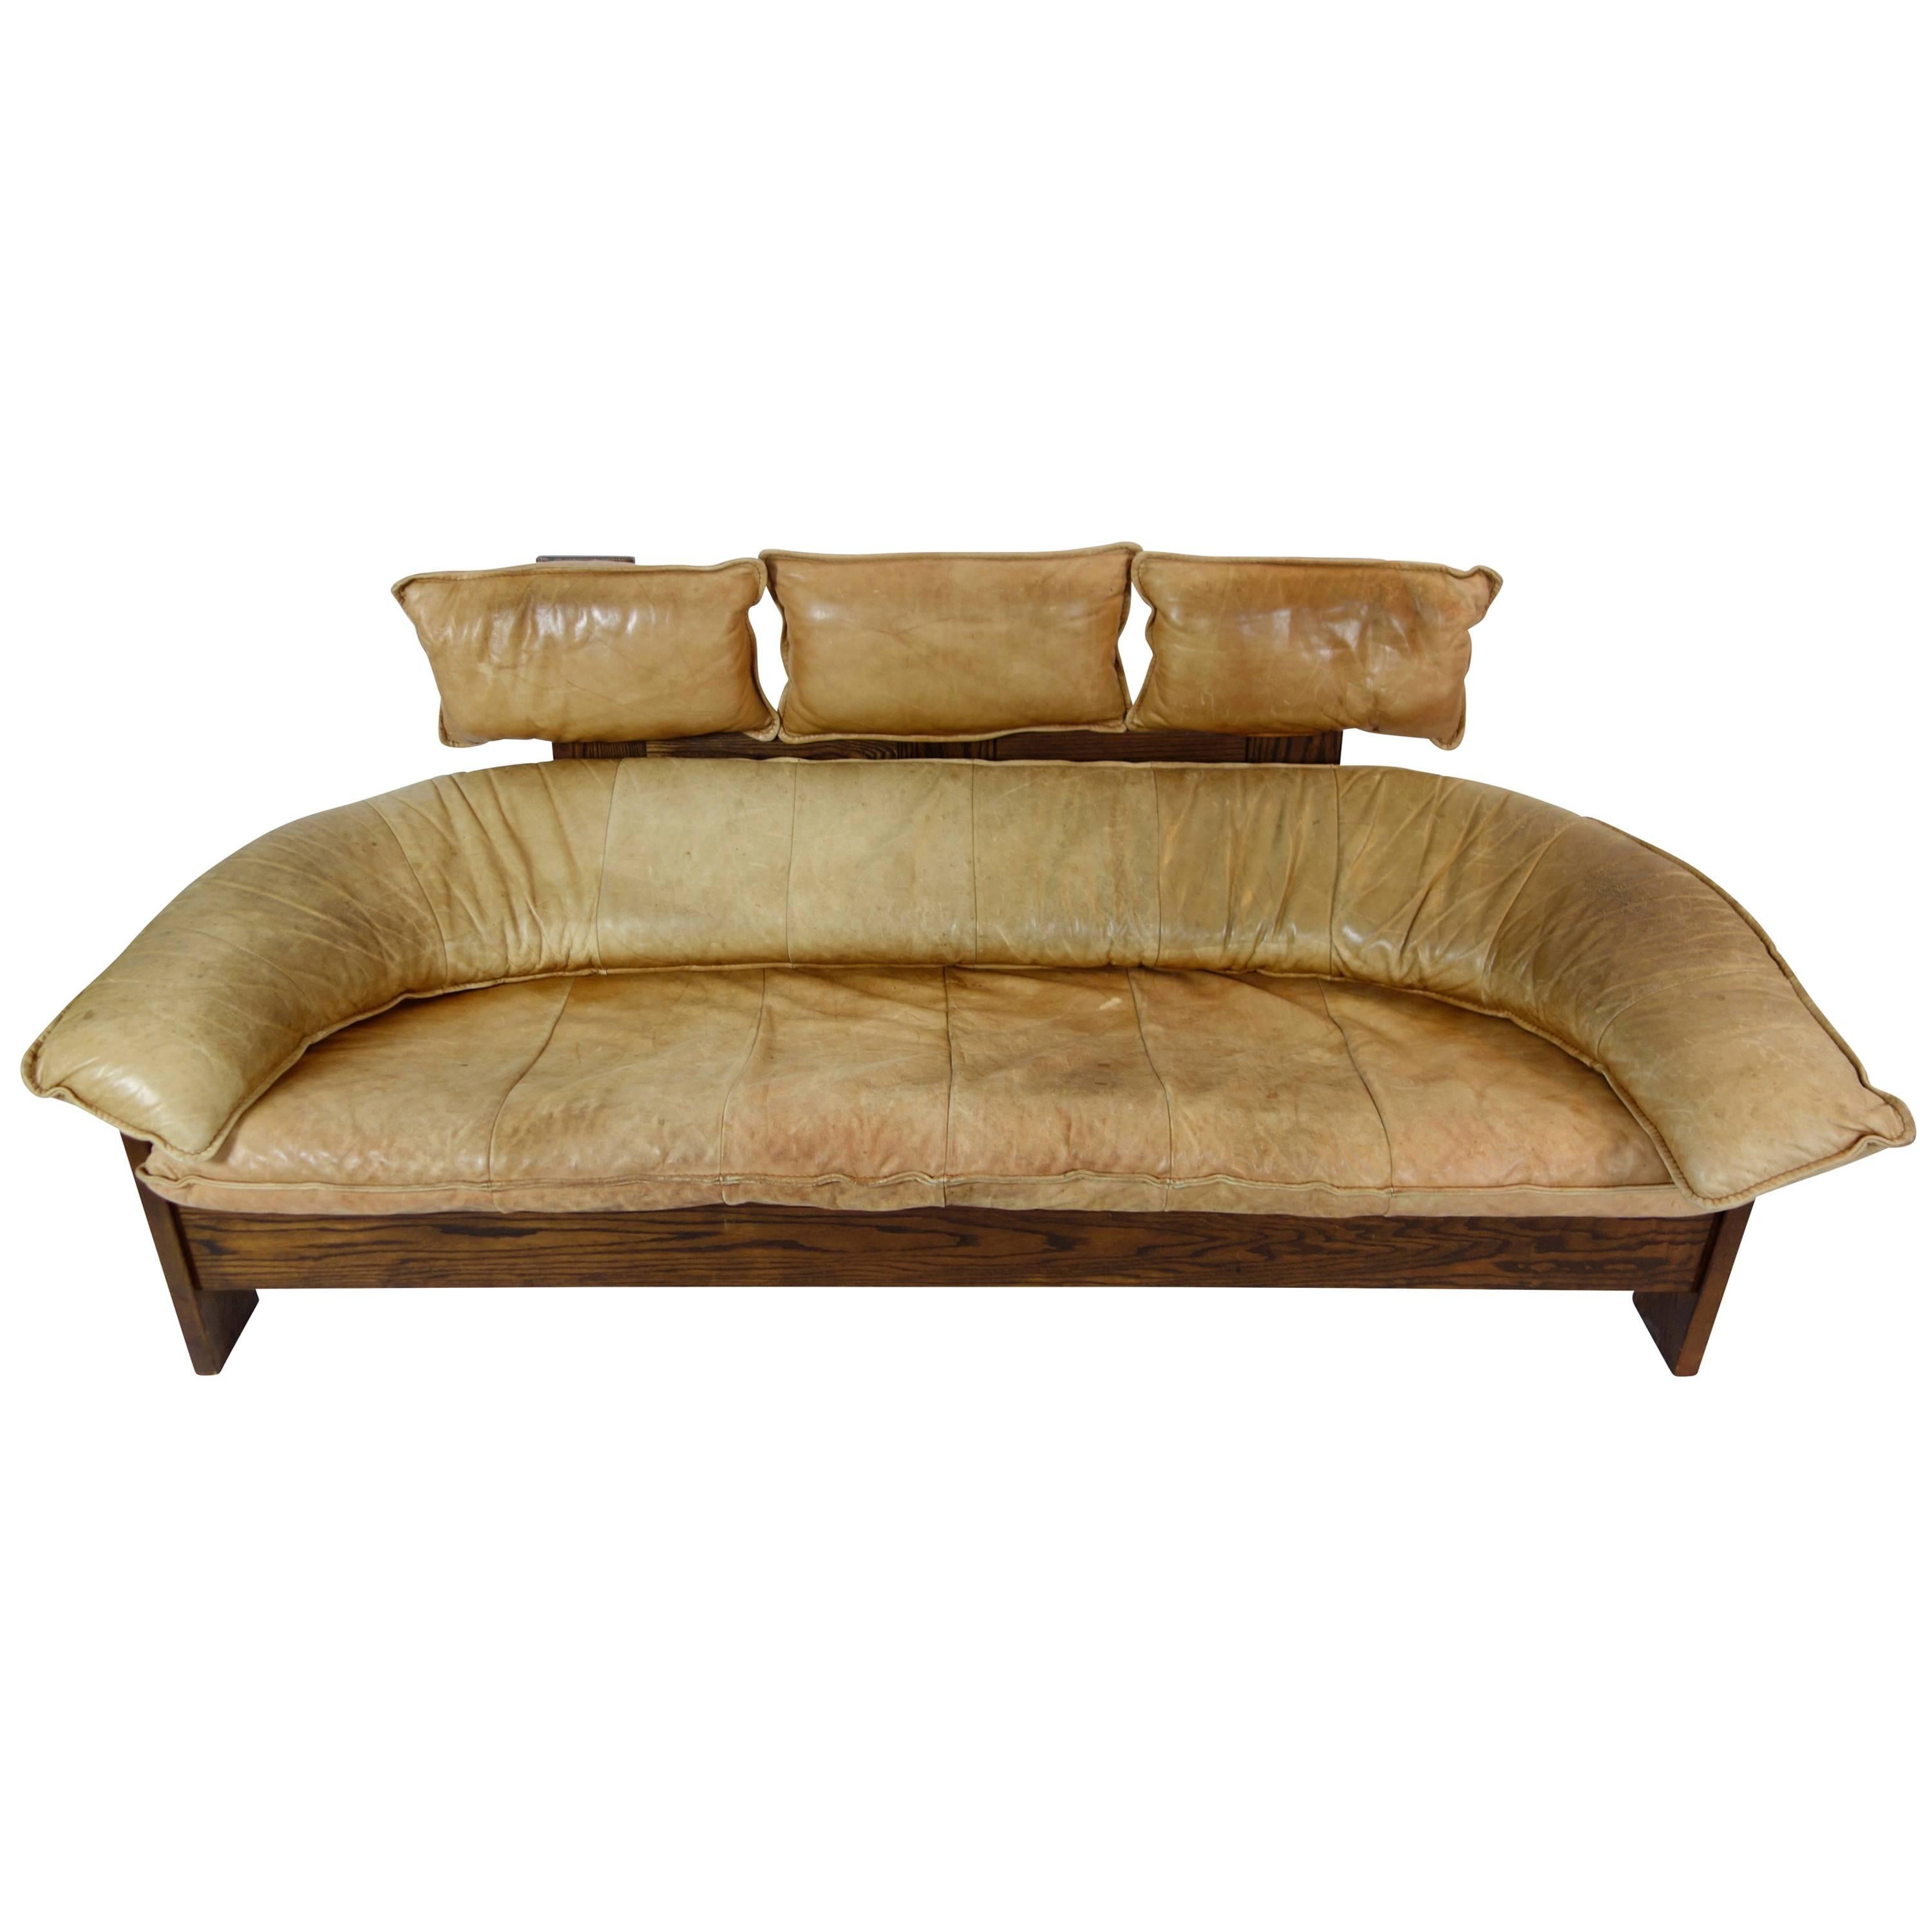 Midcentury Leather Sofa in the Style of Percival Lafer